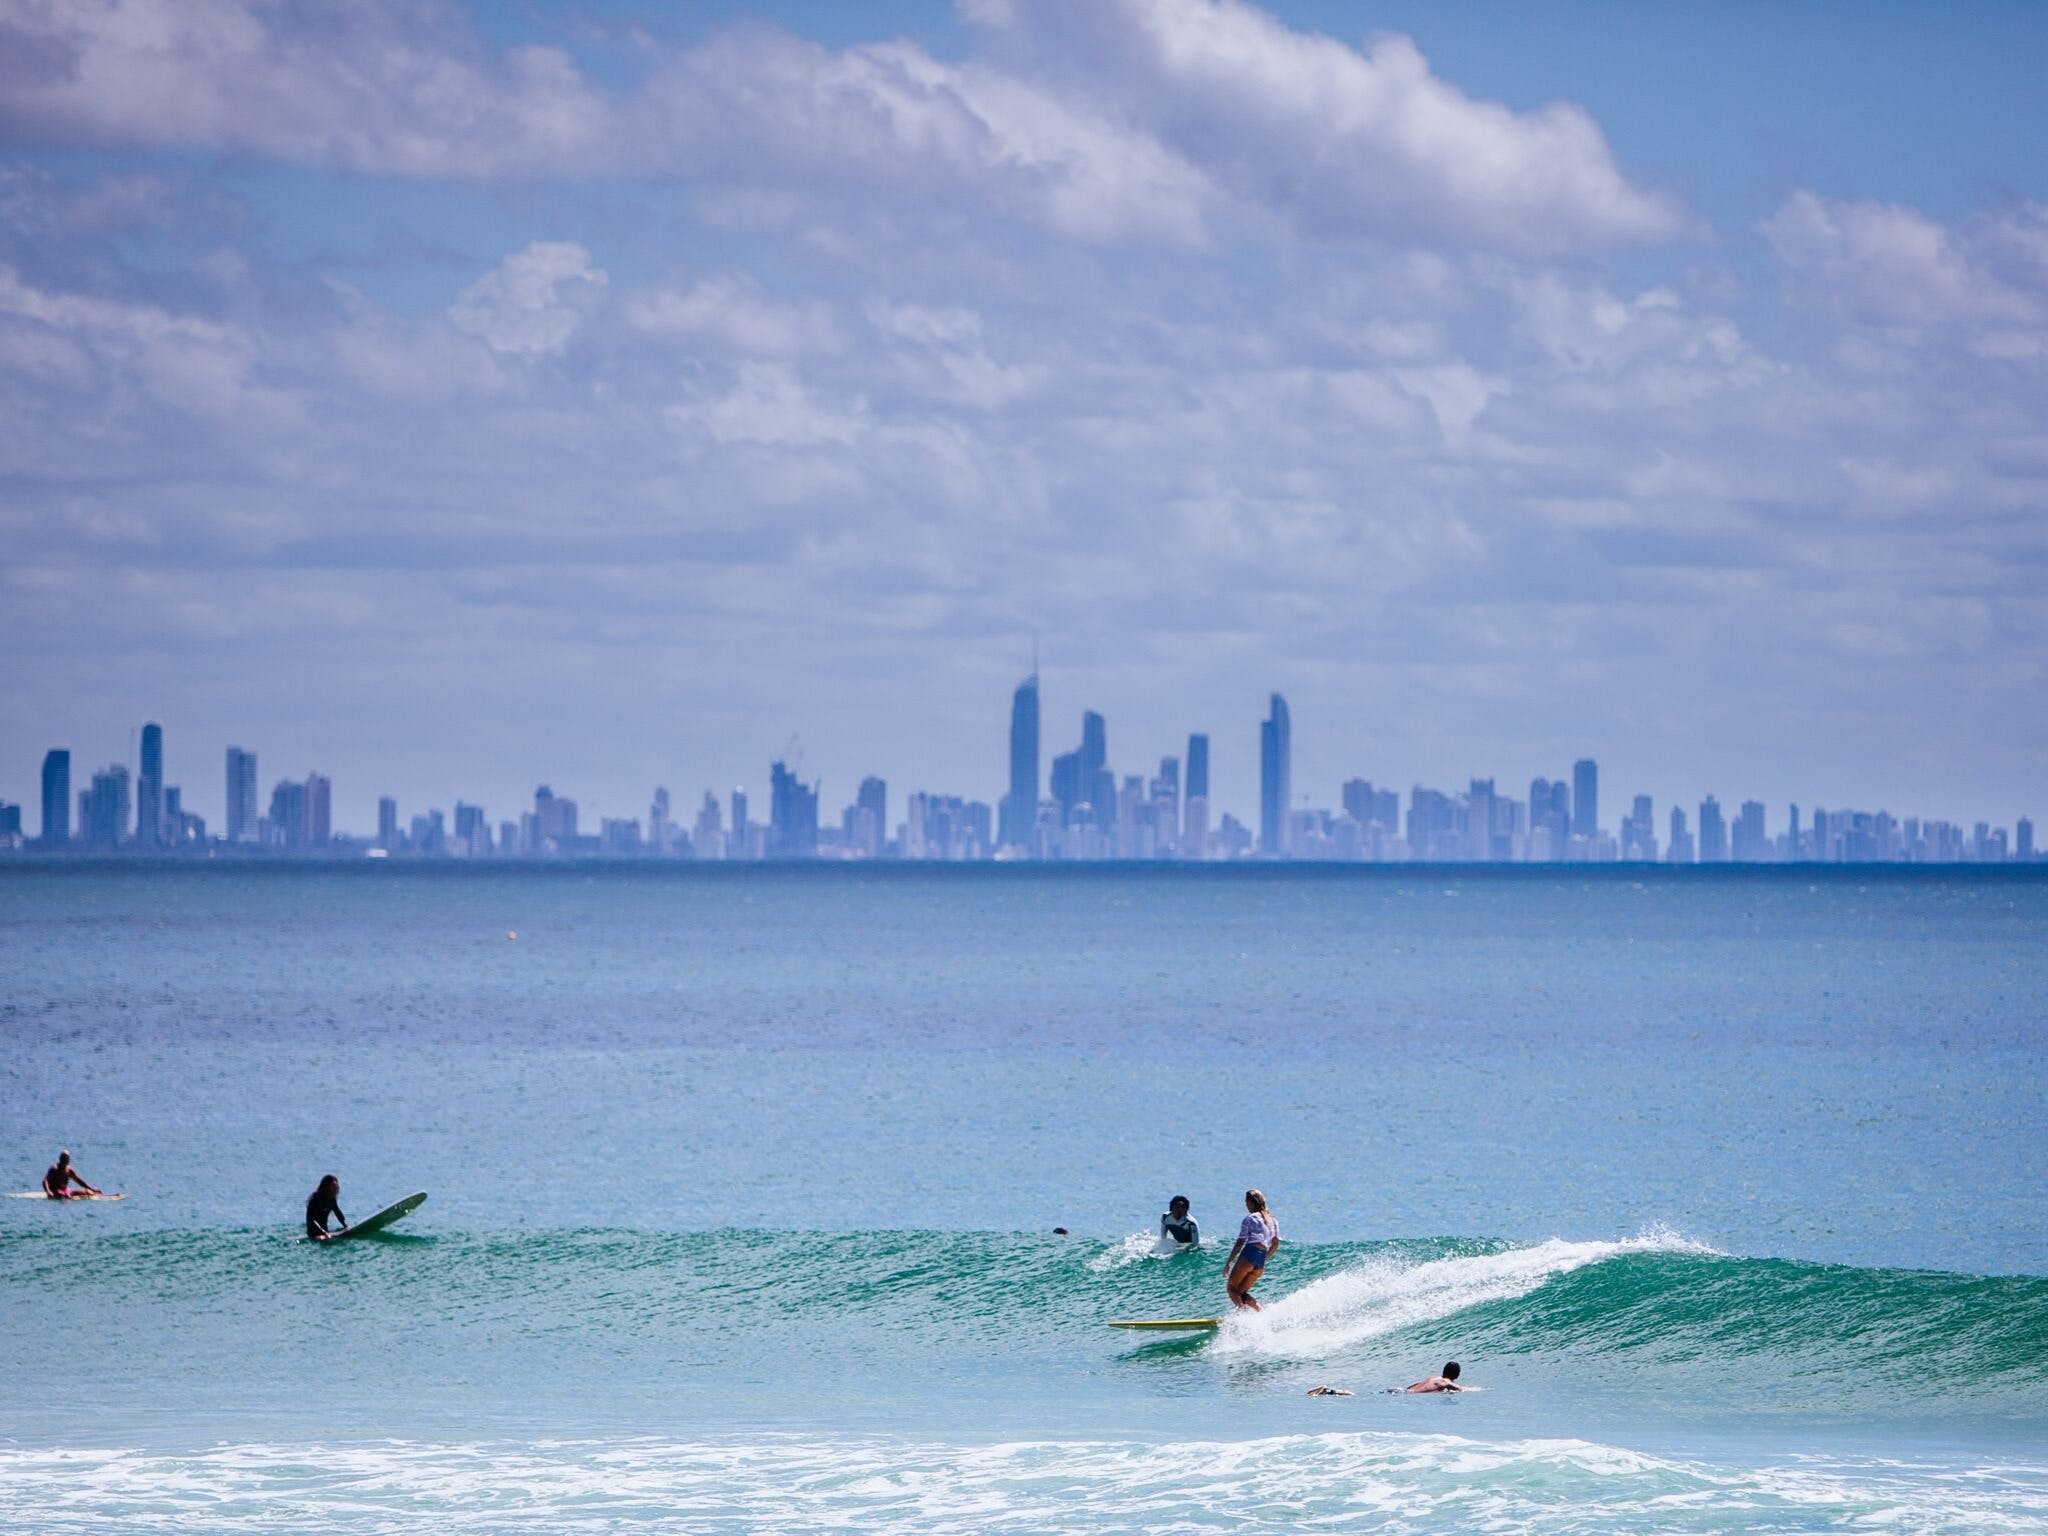 Kirra Point - Attractions Melbourne